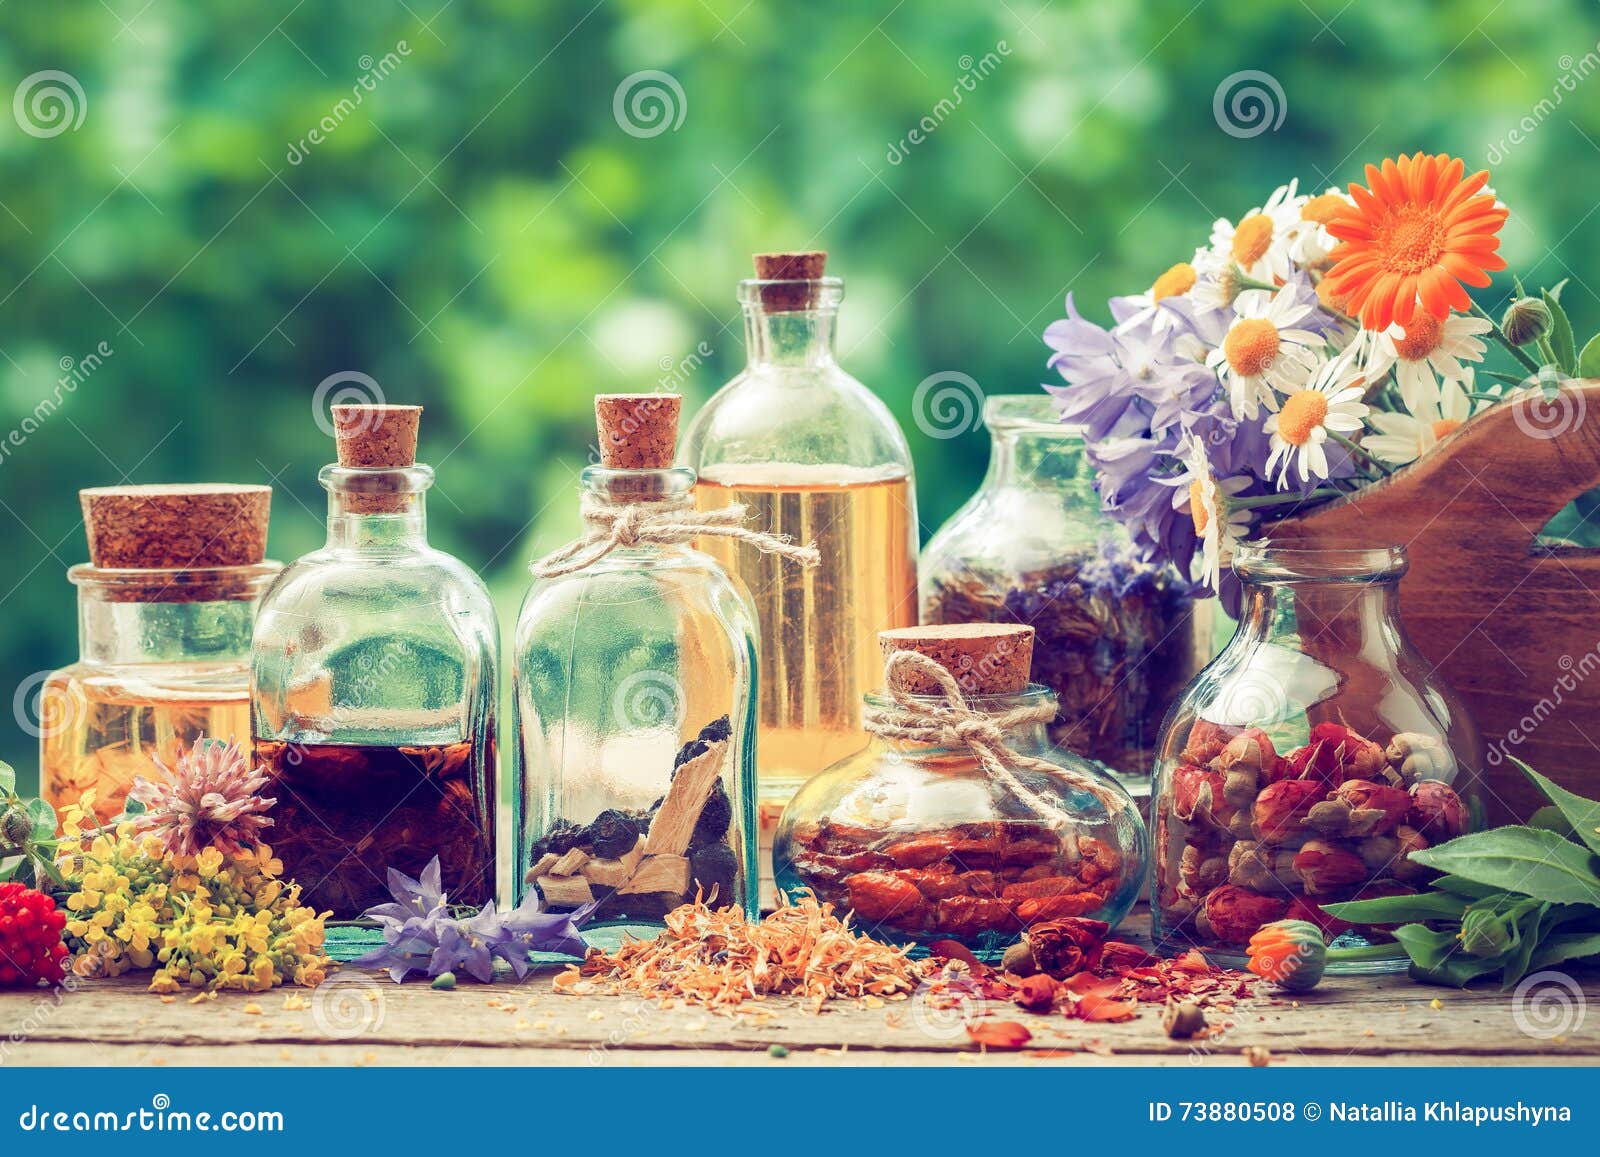 bottles of tincture and dry healthy herbs outdoors